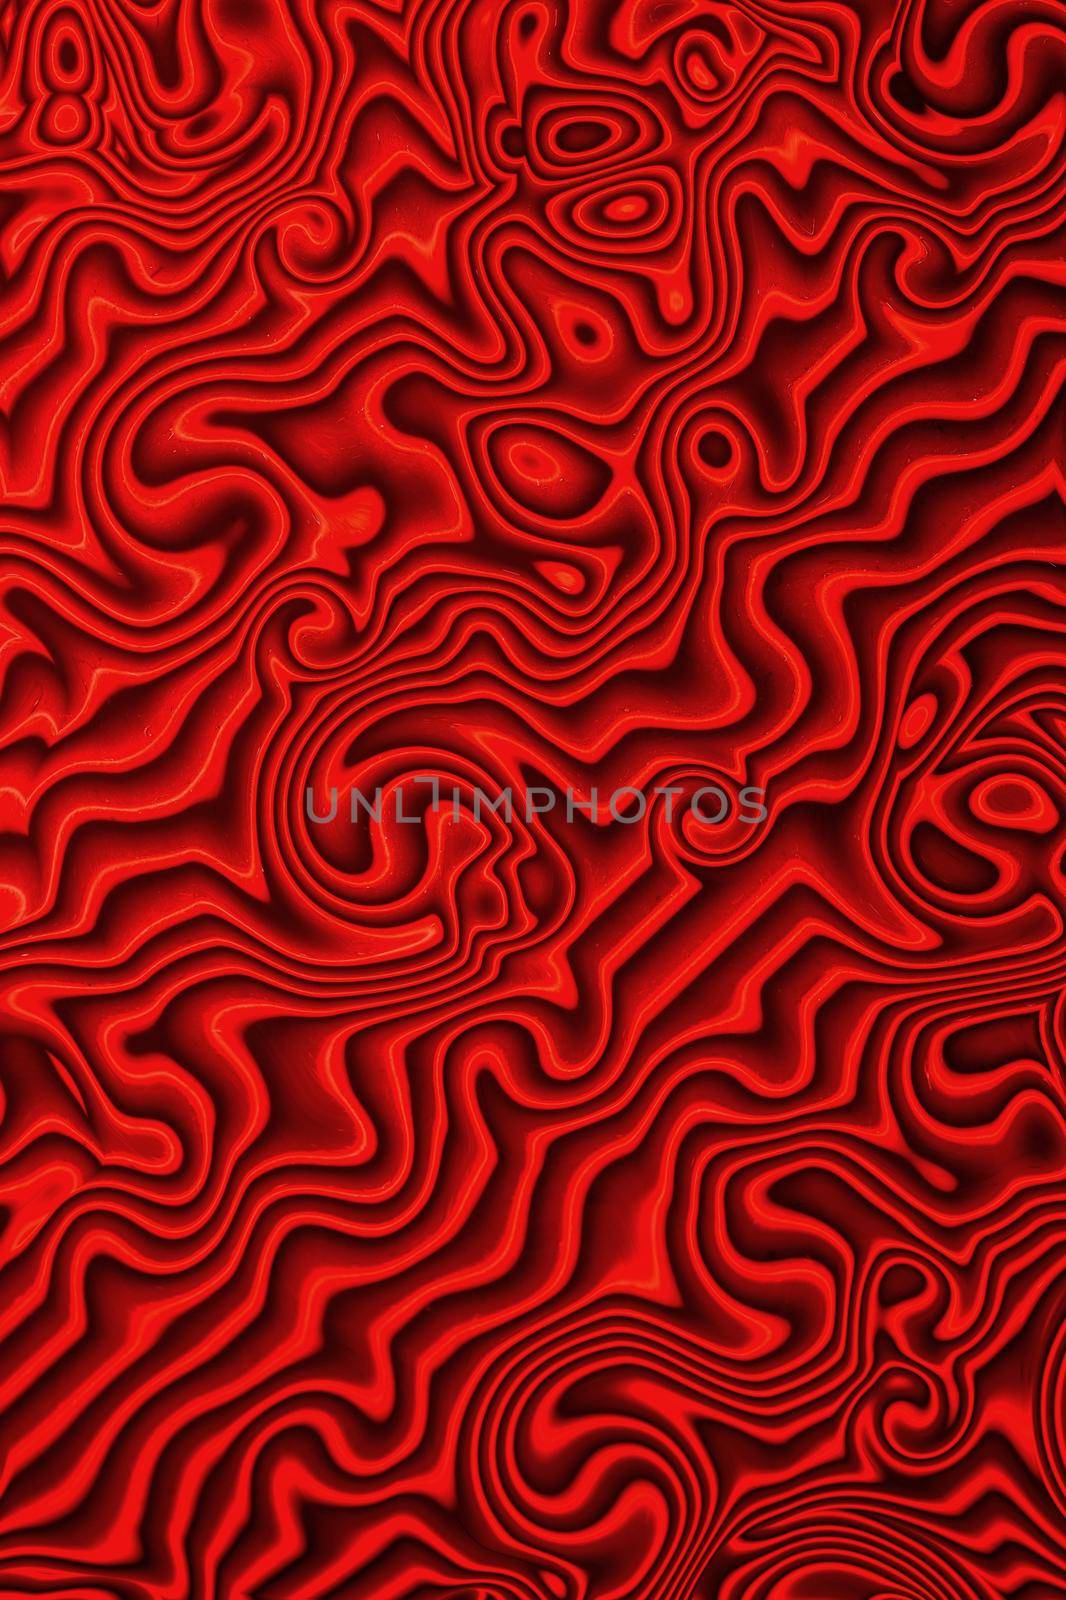 Dark red patterns and designs on solid sheet of wallpaper. Concept of home decor and interior designing. by tabishere